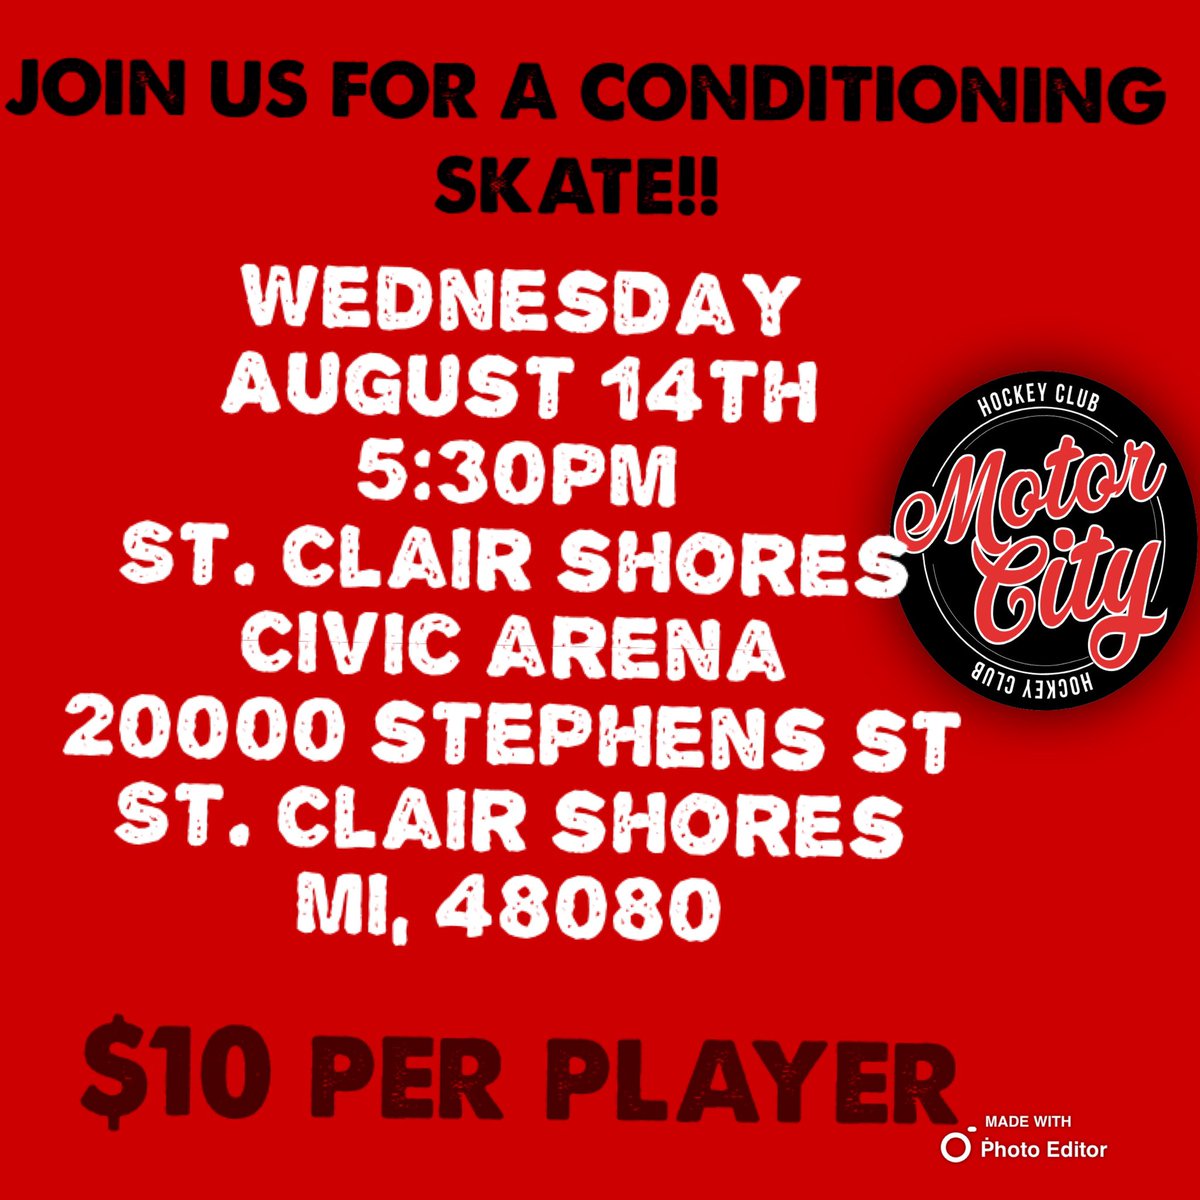 Join us for a conditioning skate today!!!